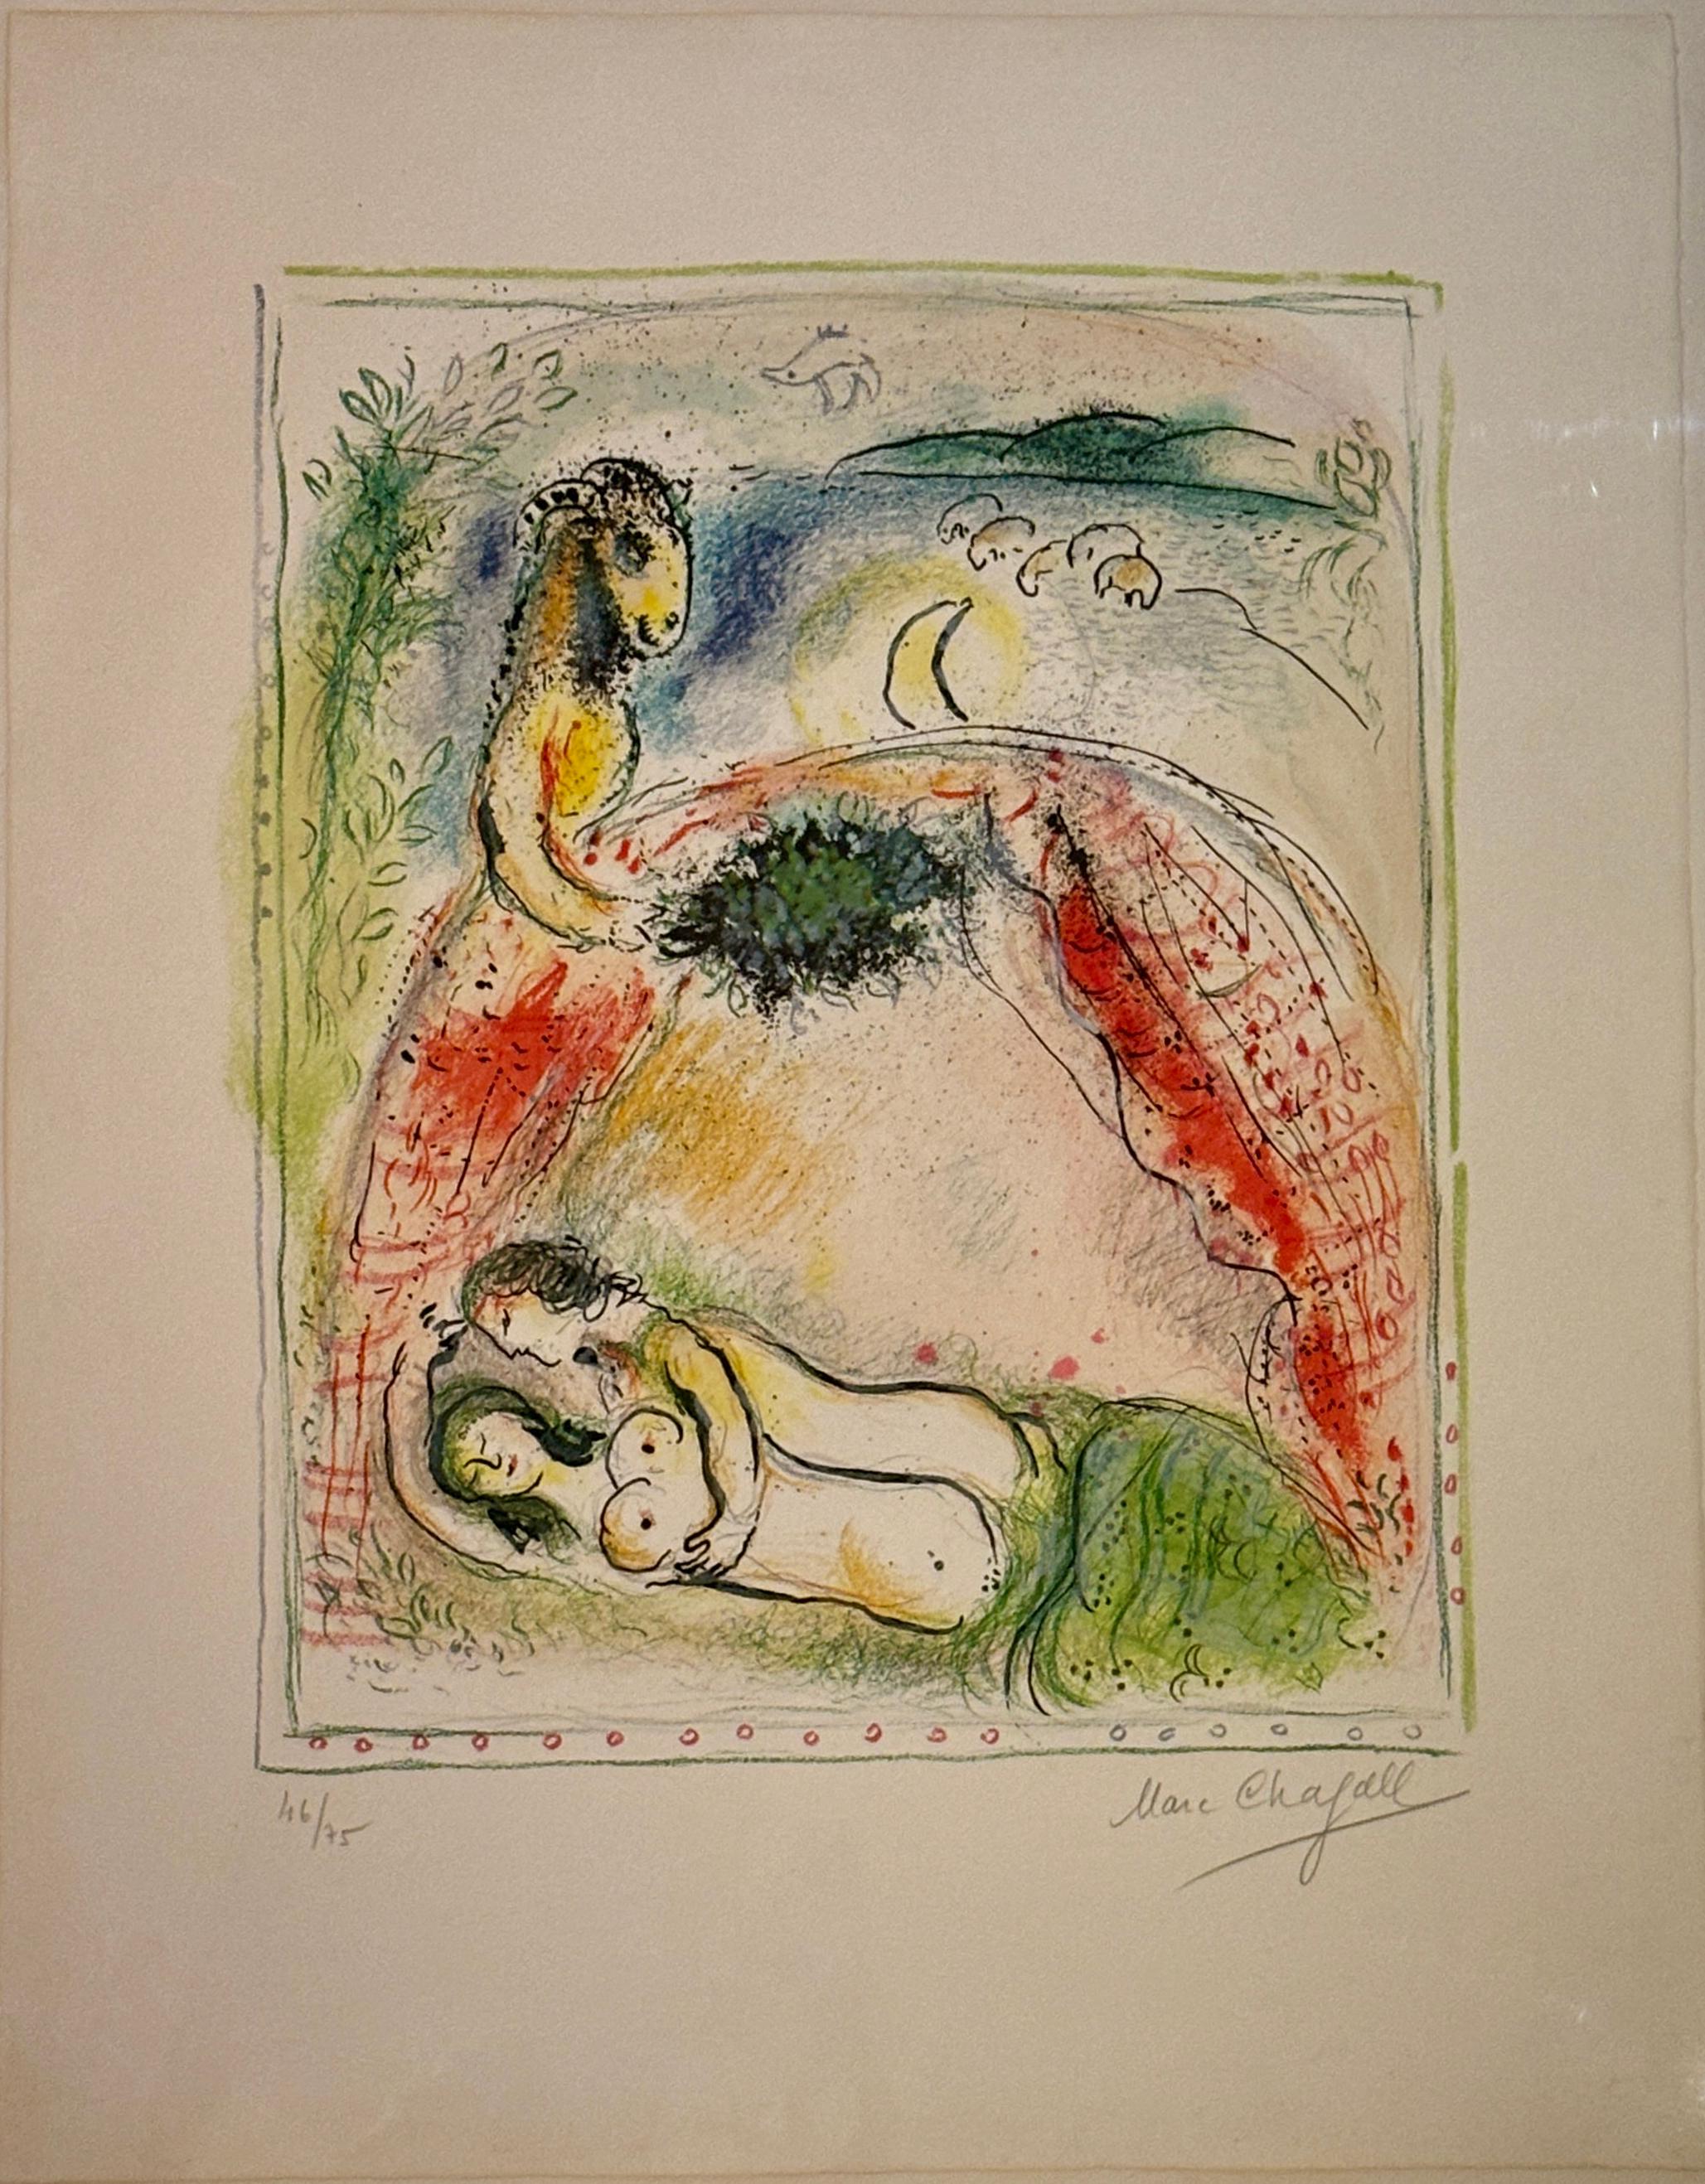 Did Marc Chagall work in the Expressionist style?